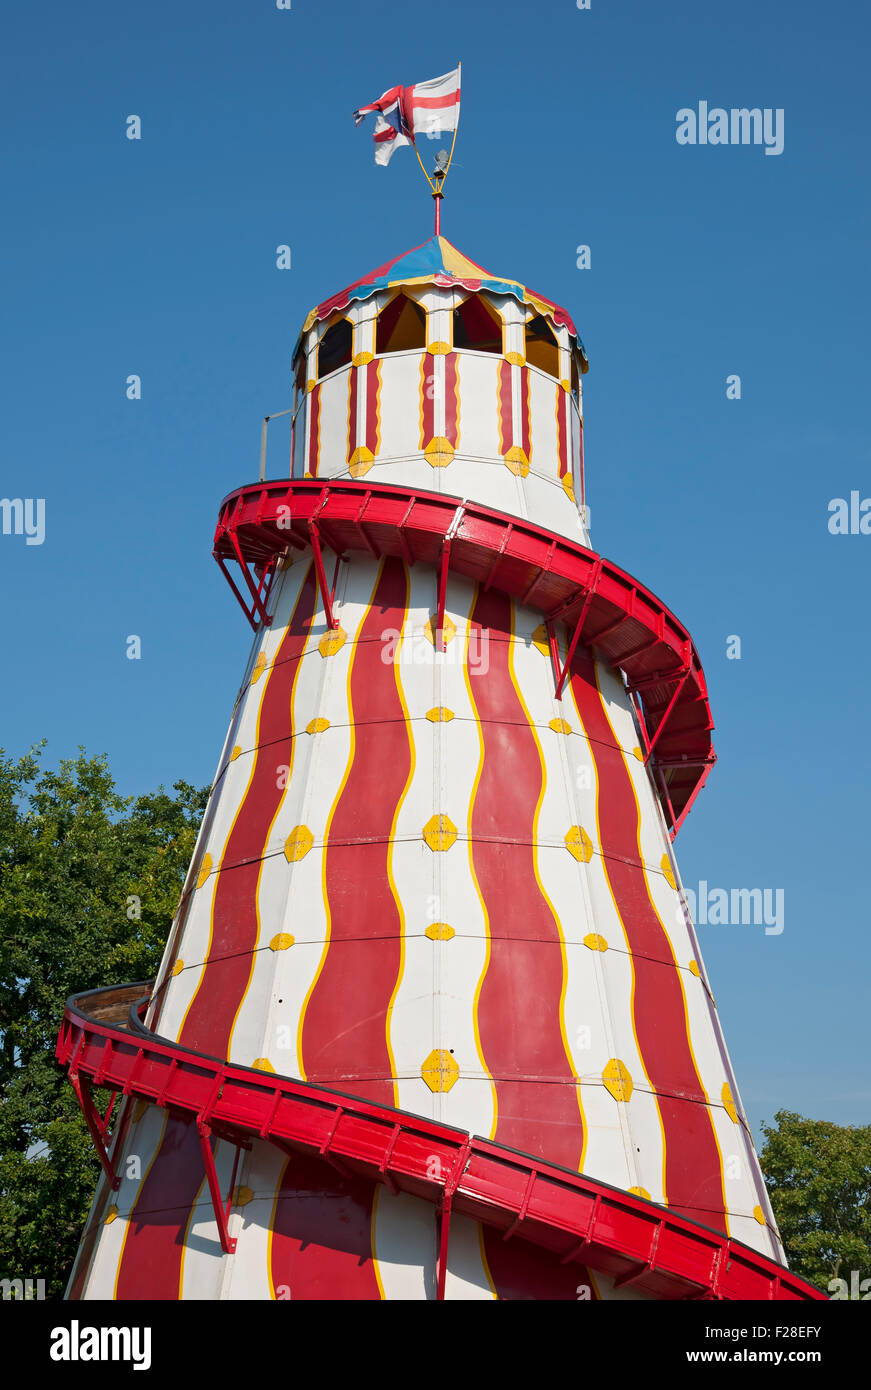 Close up of Helter skelter ride at a funfair fair in summer York North Yorkshire England UK United Kingdom GB Great Britain Stock Photo